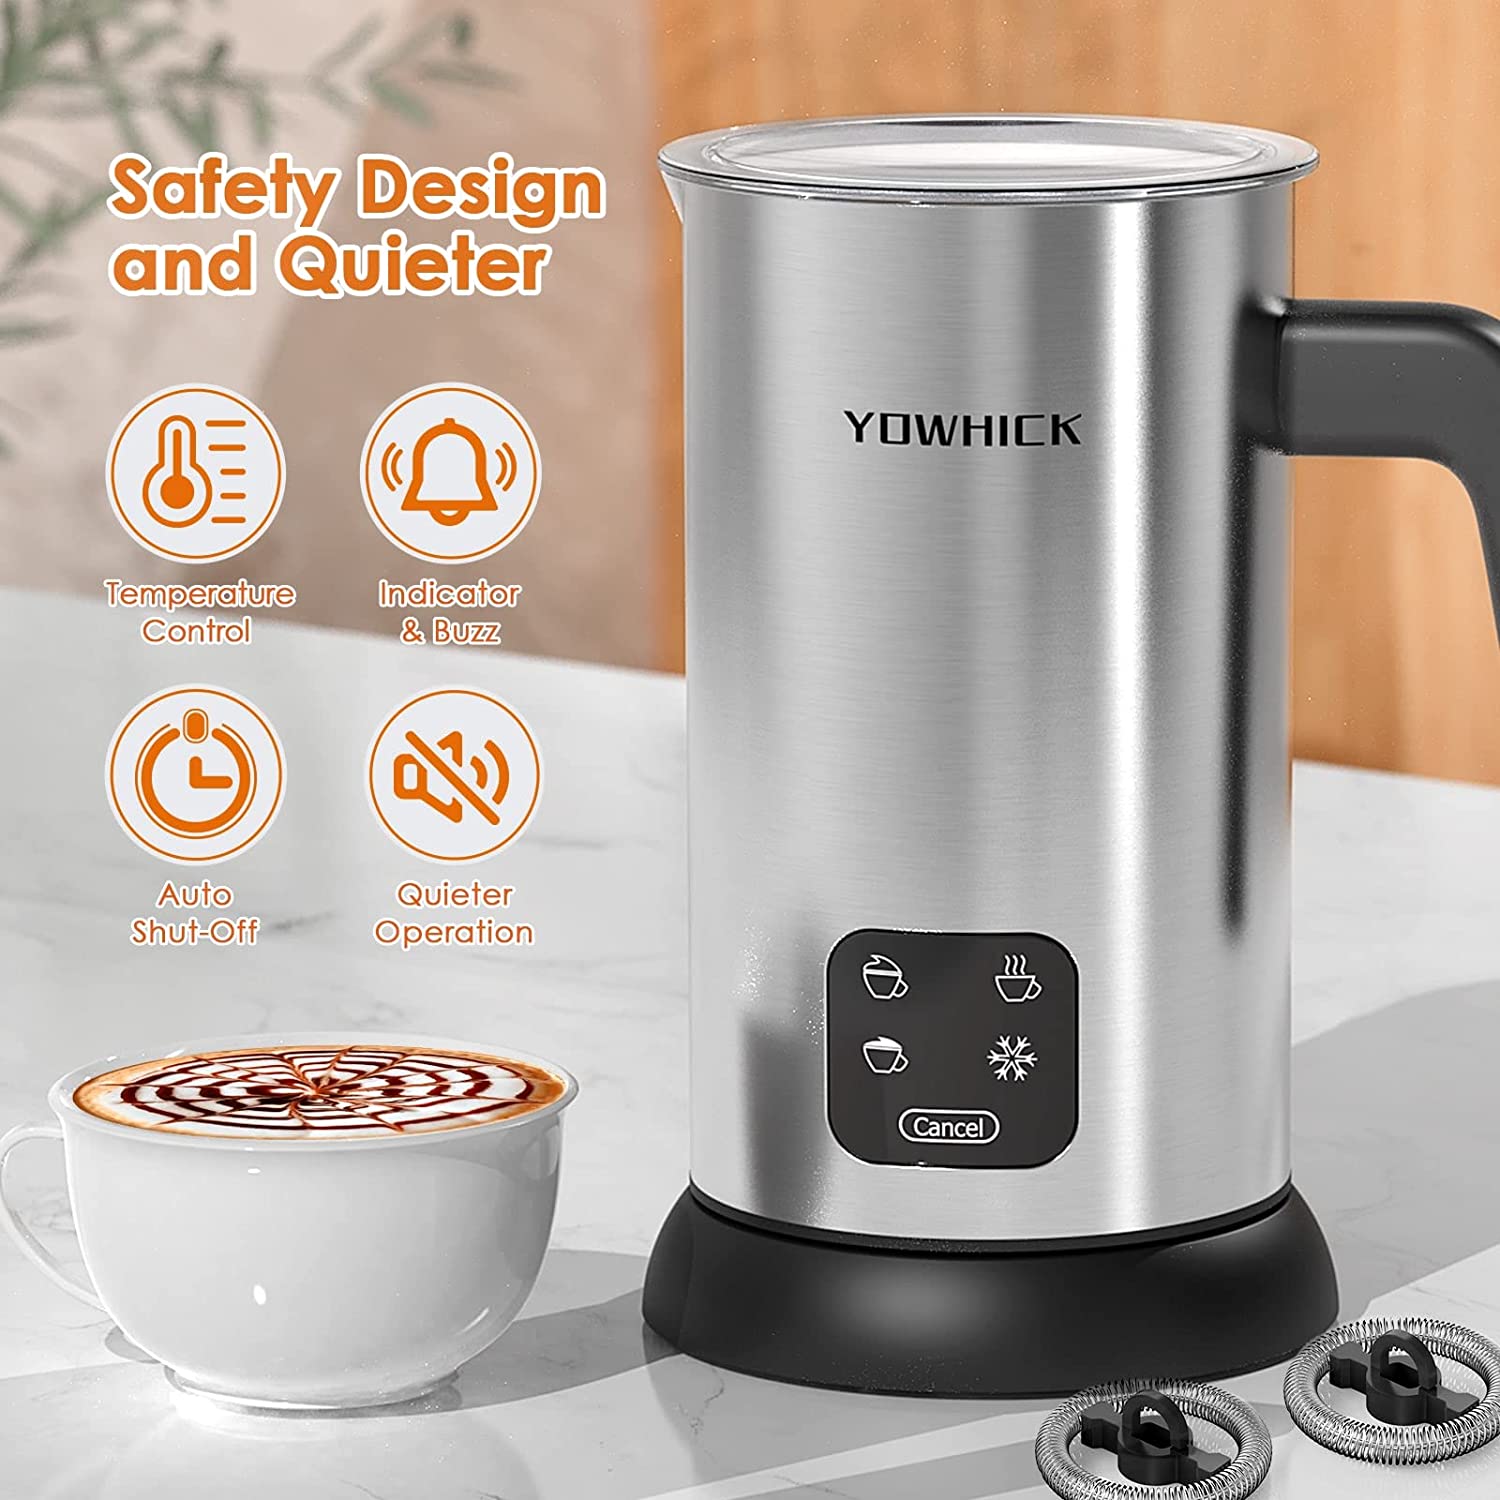 YOWHICK Milk Frother, 4-in-1 Electric Milk Steamer Stainless Steel,10.1oz/300ml Large Capacity, Automatic Hot/Cold Foam Maker and Milk Warmer for Latte, Cappuccinos, Macchiato, Hot Chocolate,120V - YOWHICK